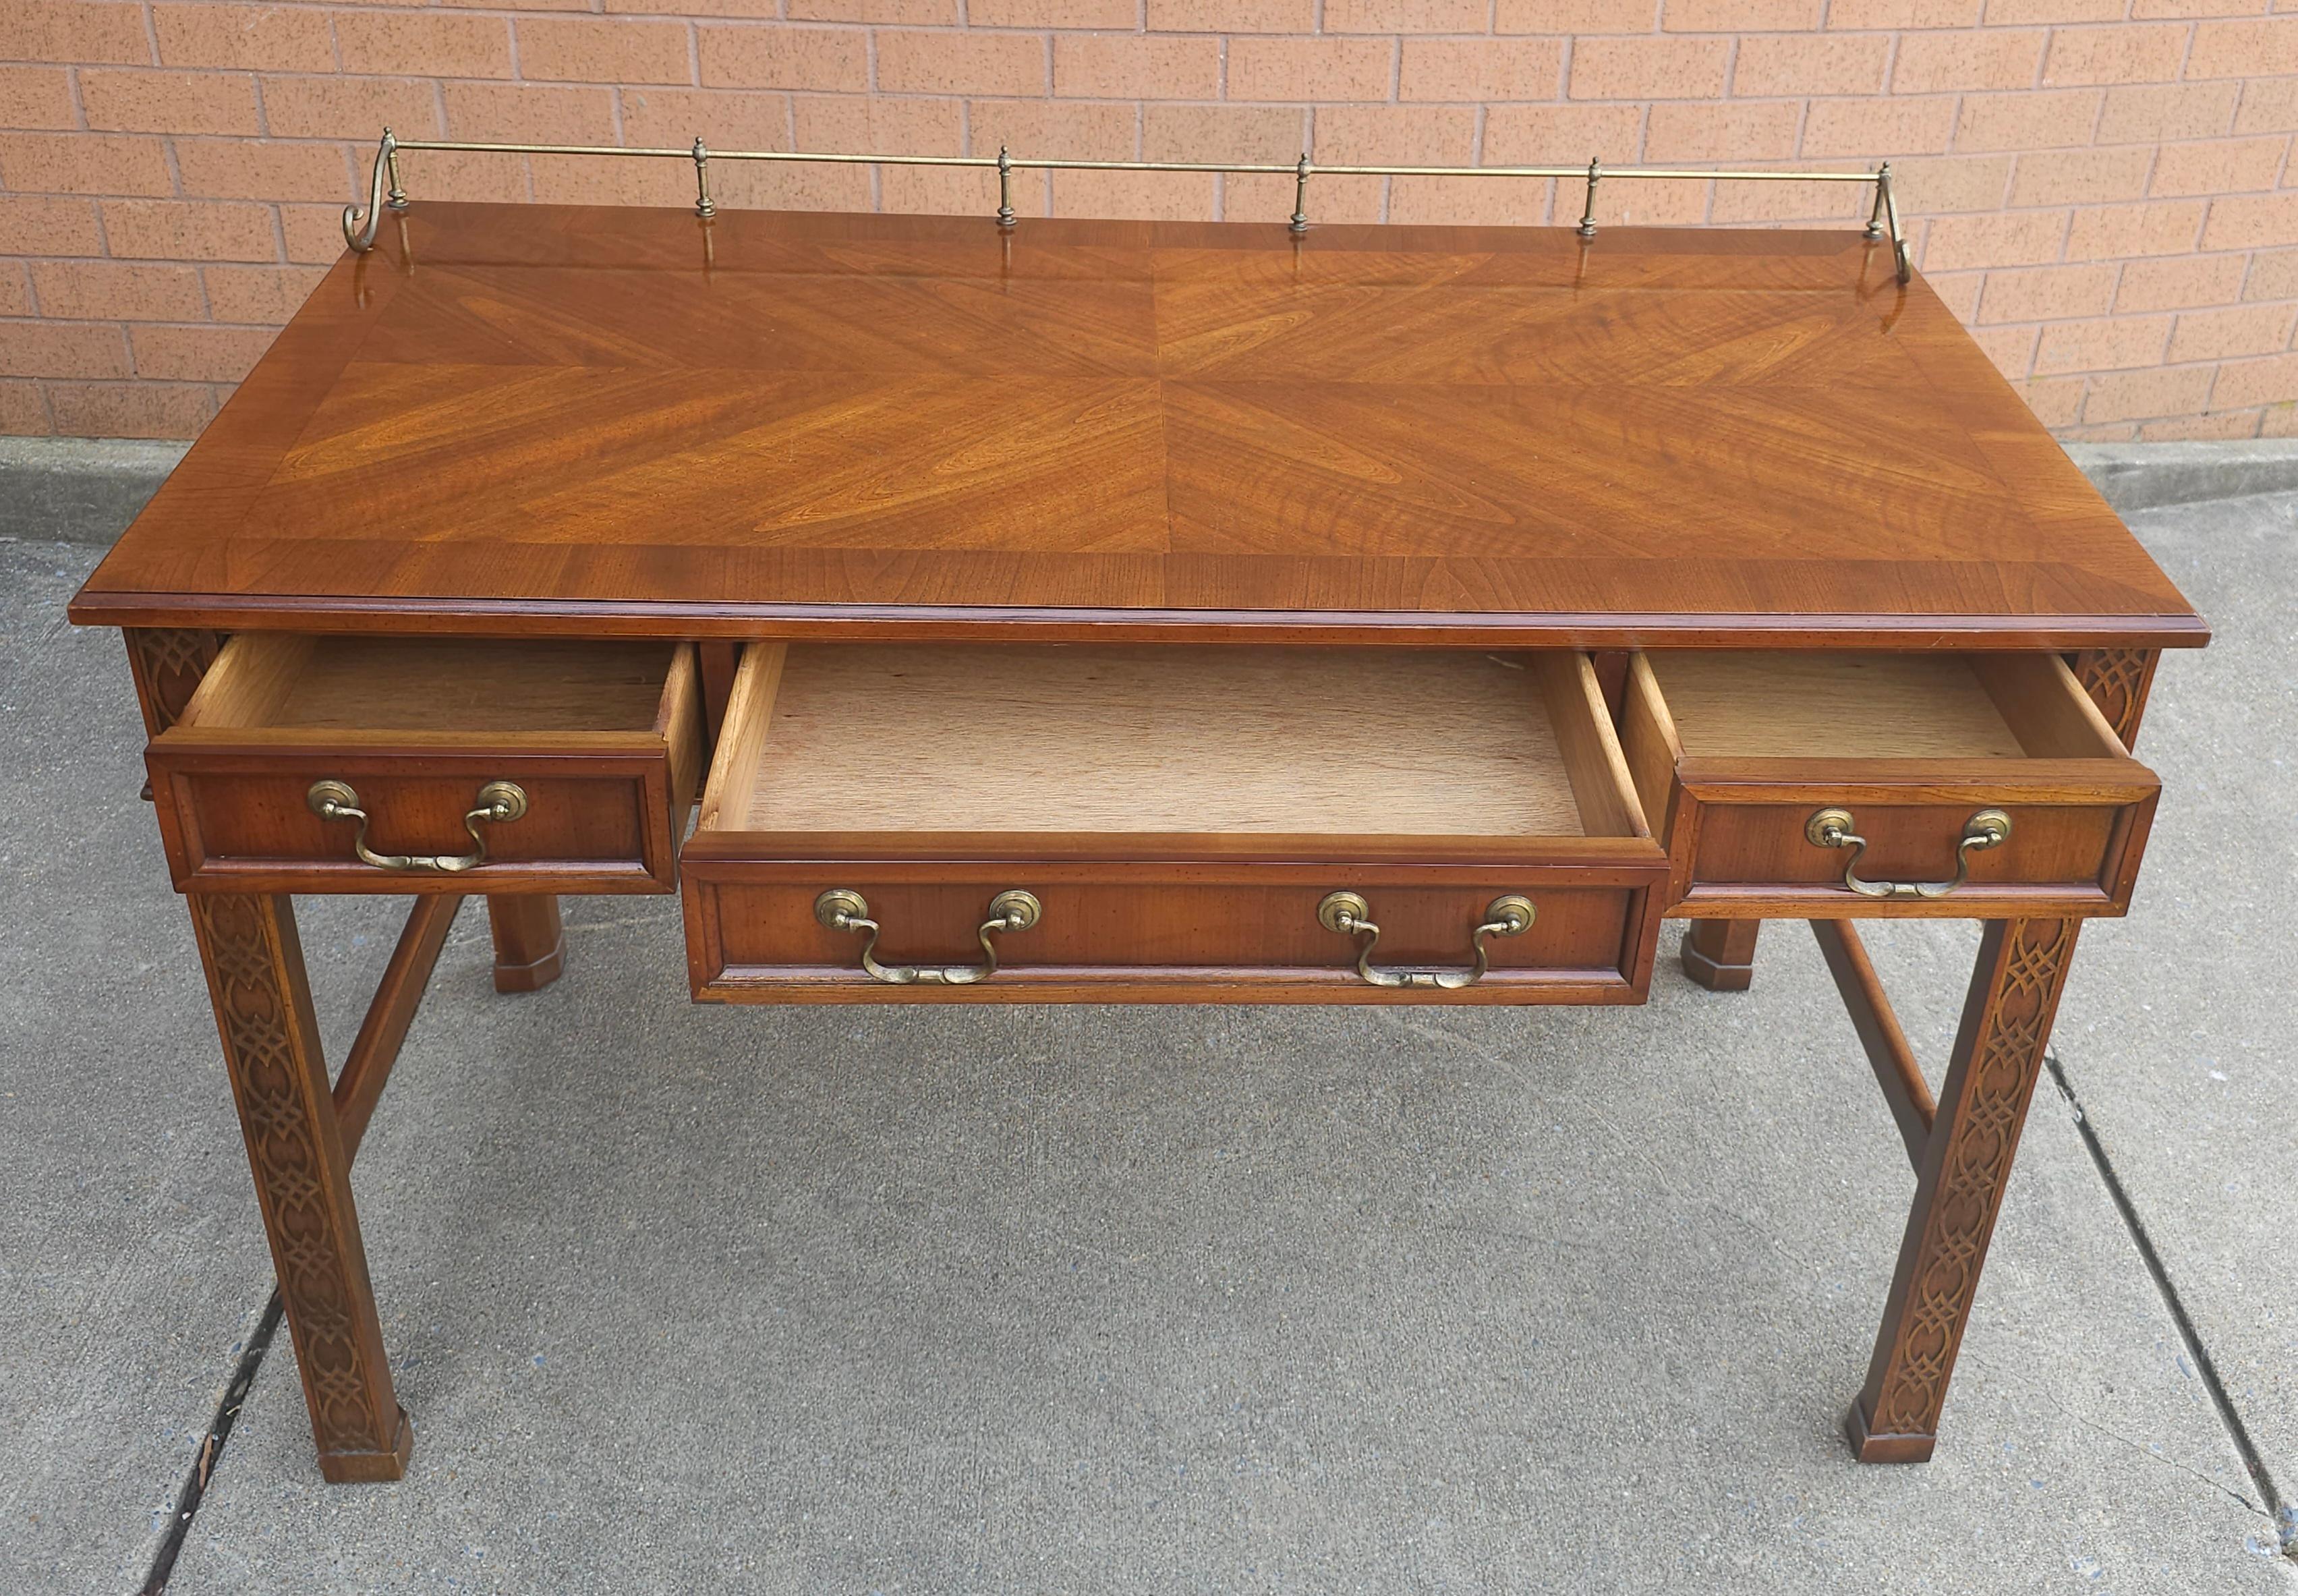 George III Style Blind Fretwork Mahogany Table Desk w/ Gallery In Good Condition For Sale In Germantown, MD